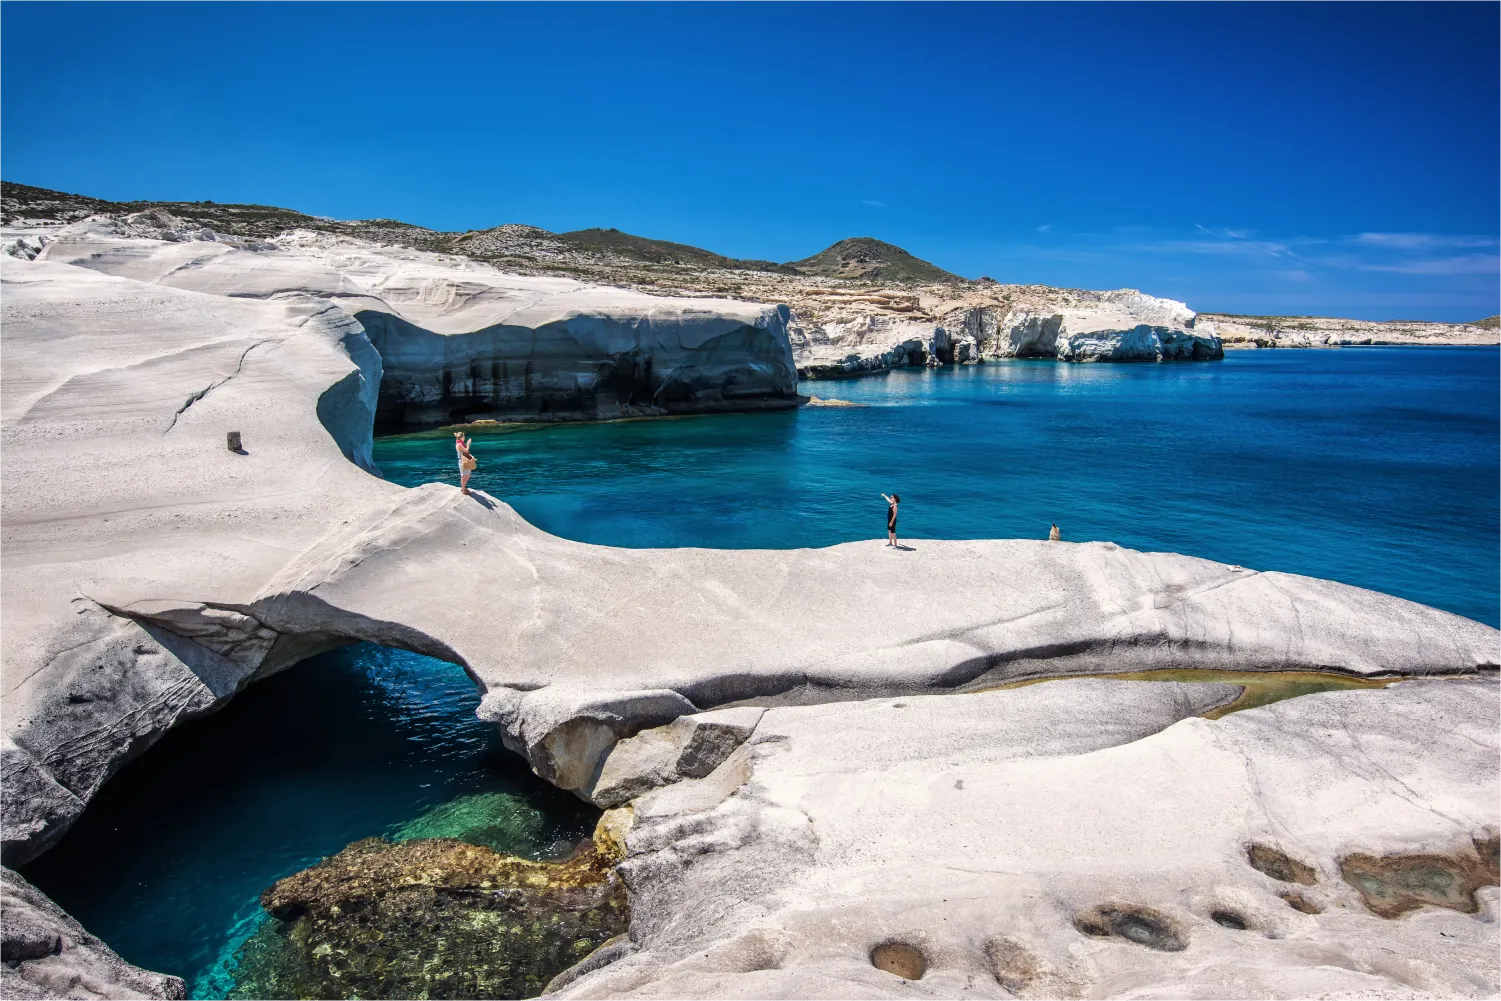 The stunning Sarakiniko Beach in Milos with its white rocks and blue waters